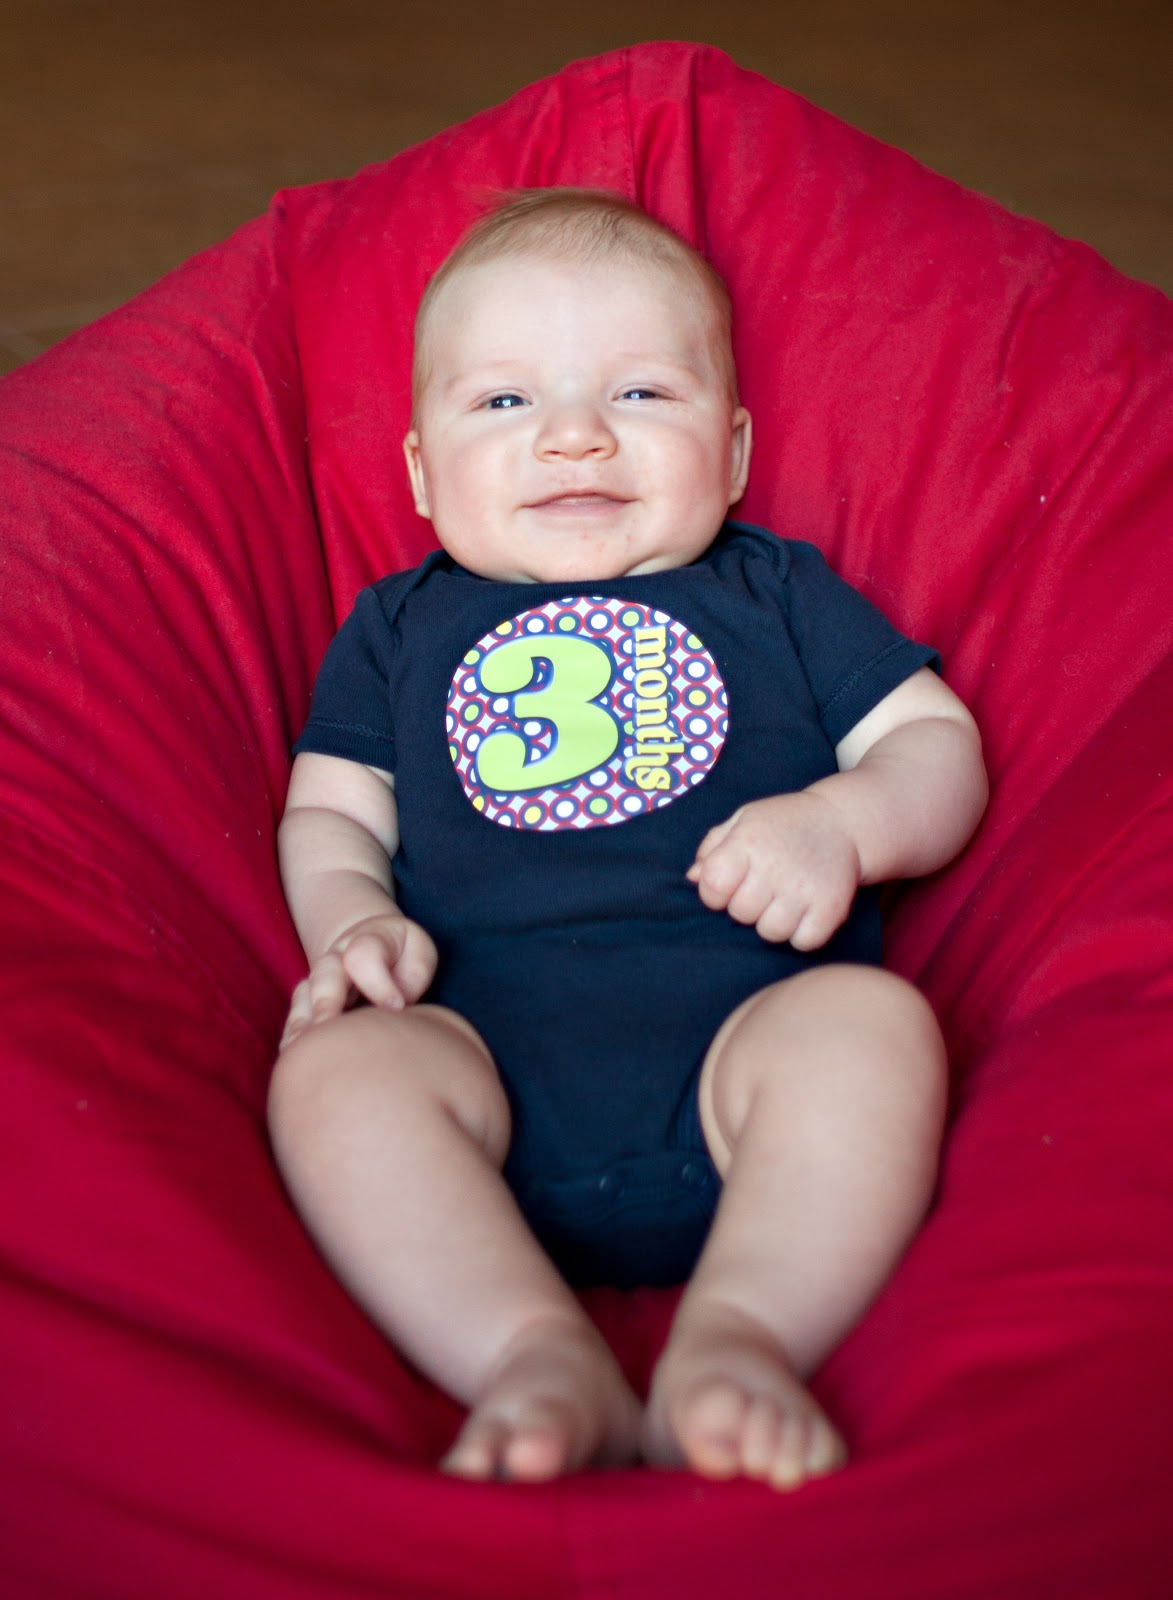 Shiplett Family - Welcome To Our Blog!: Happy 3-Month Birthday!!!